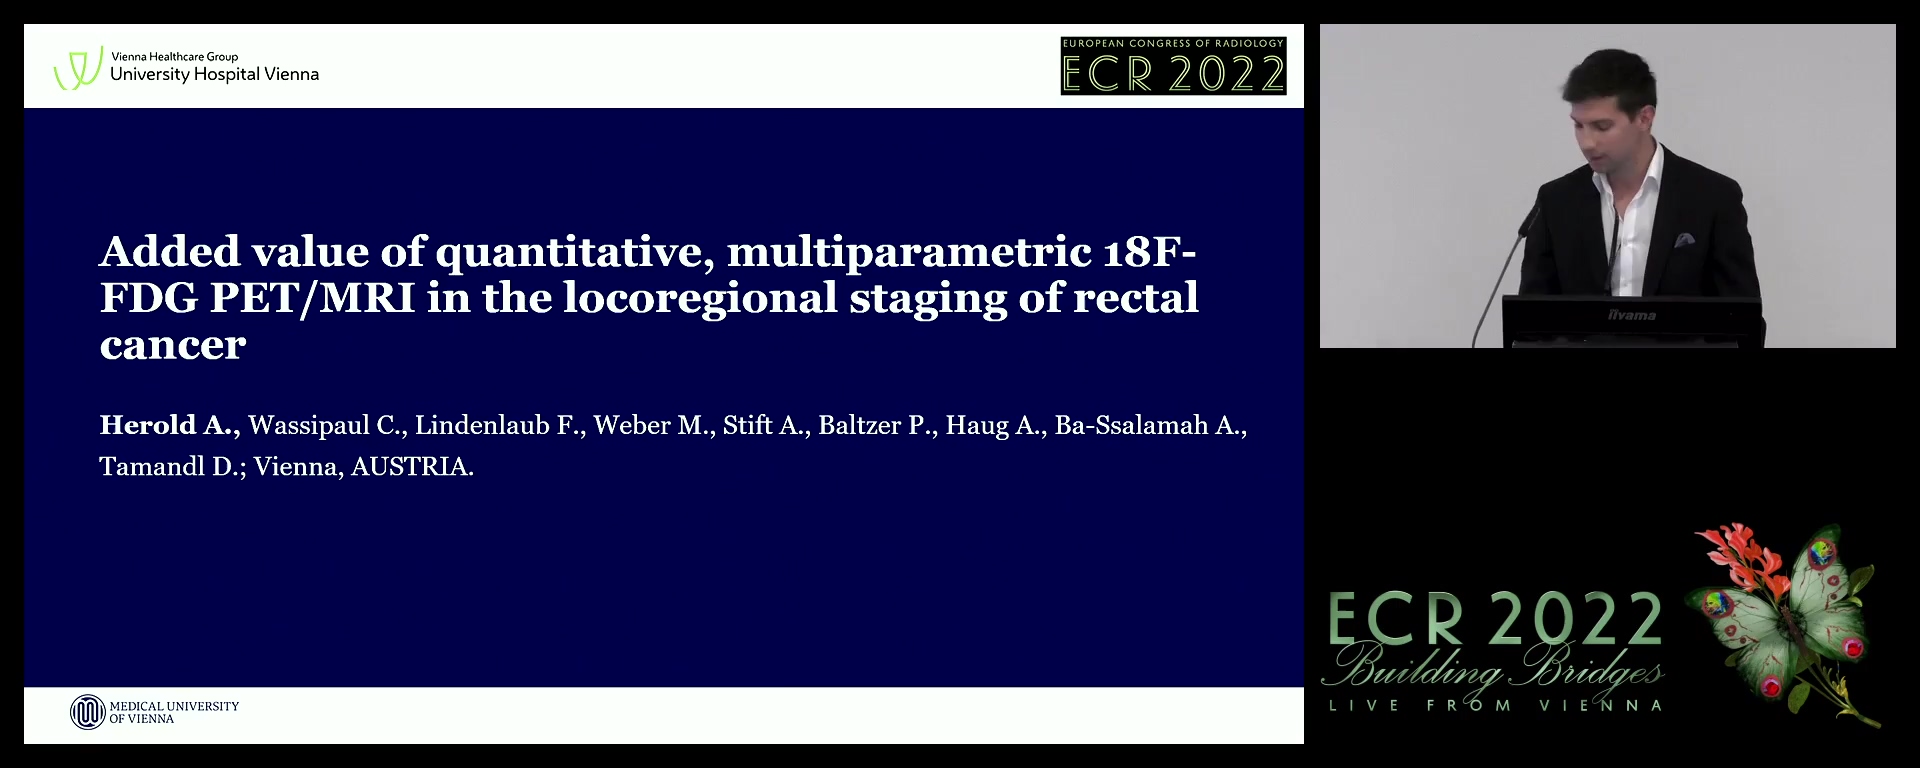 Added value of multiparametric PET/MRI in staging of rectal cancer - Alexander Herold, Vienna / AT